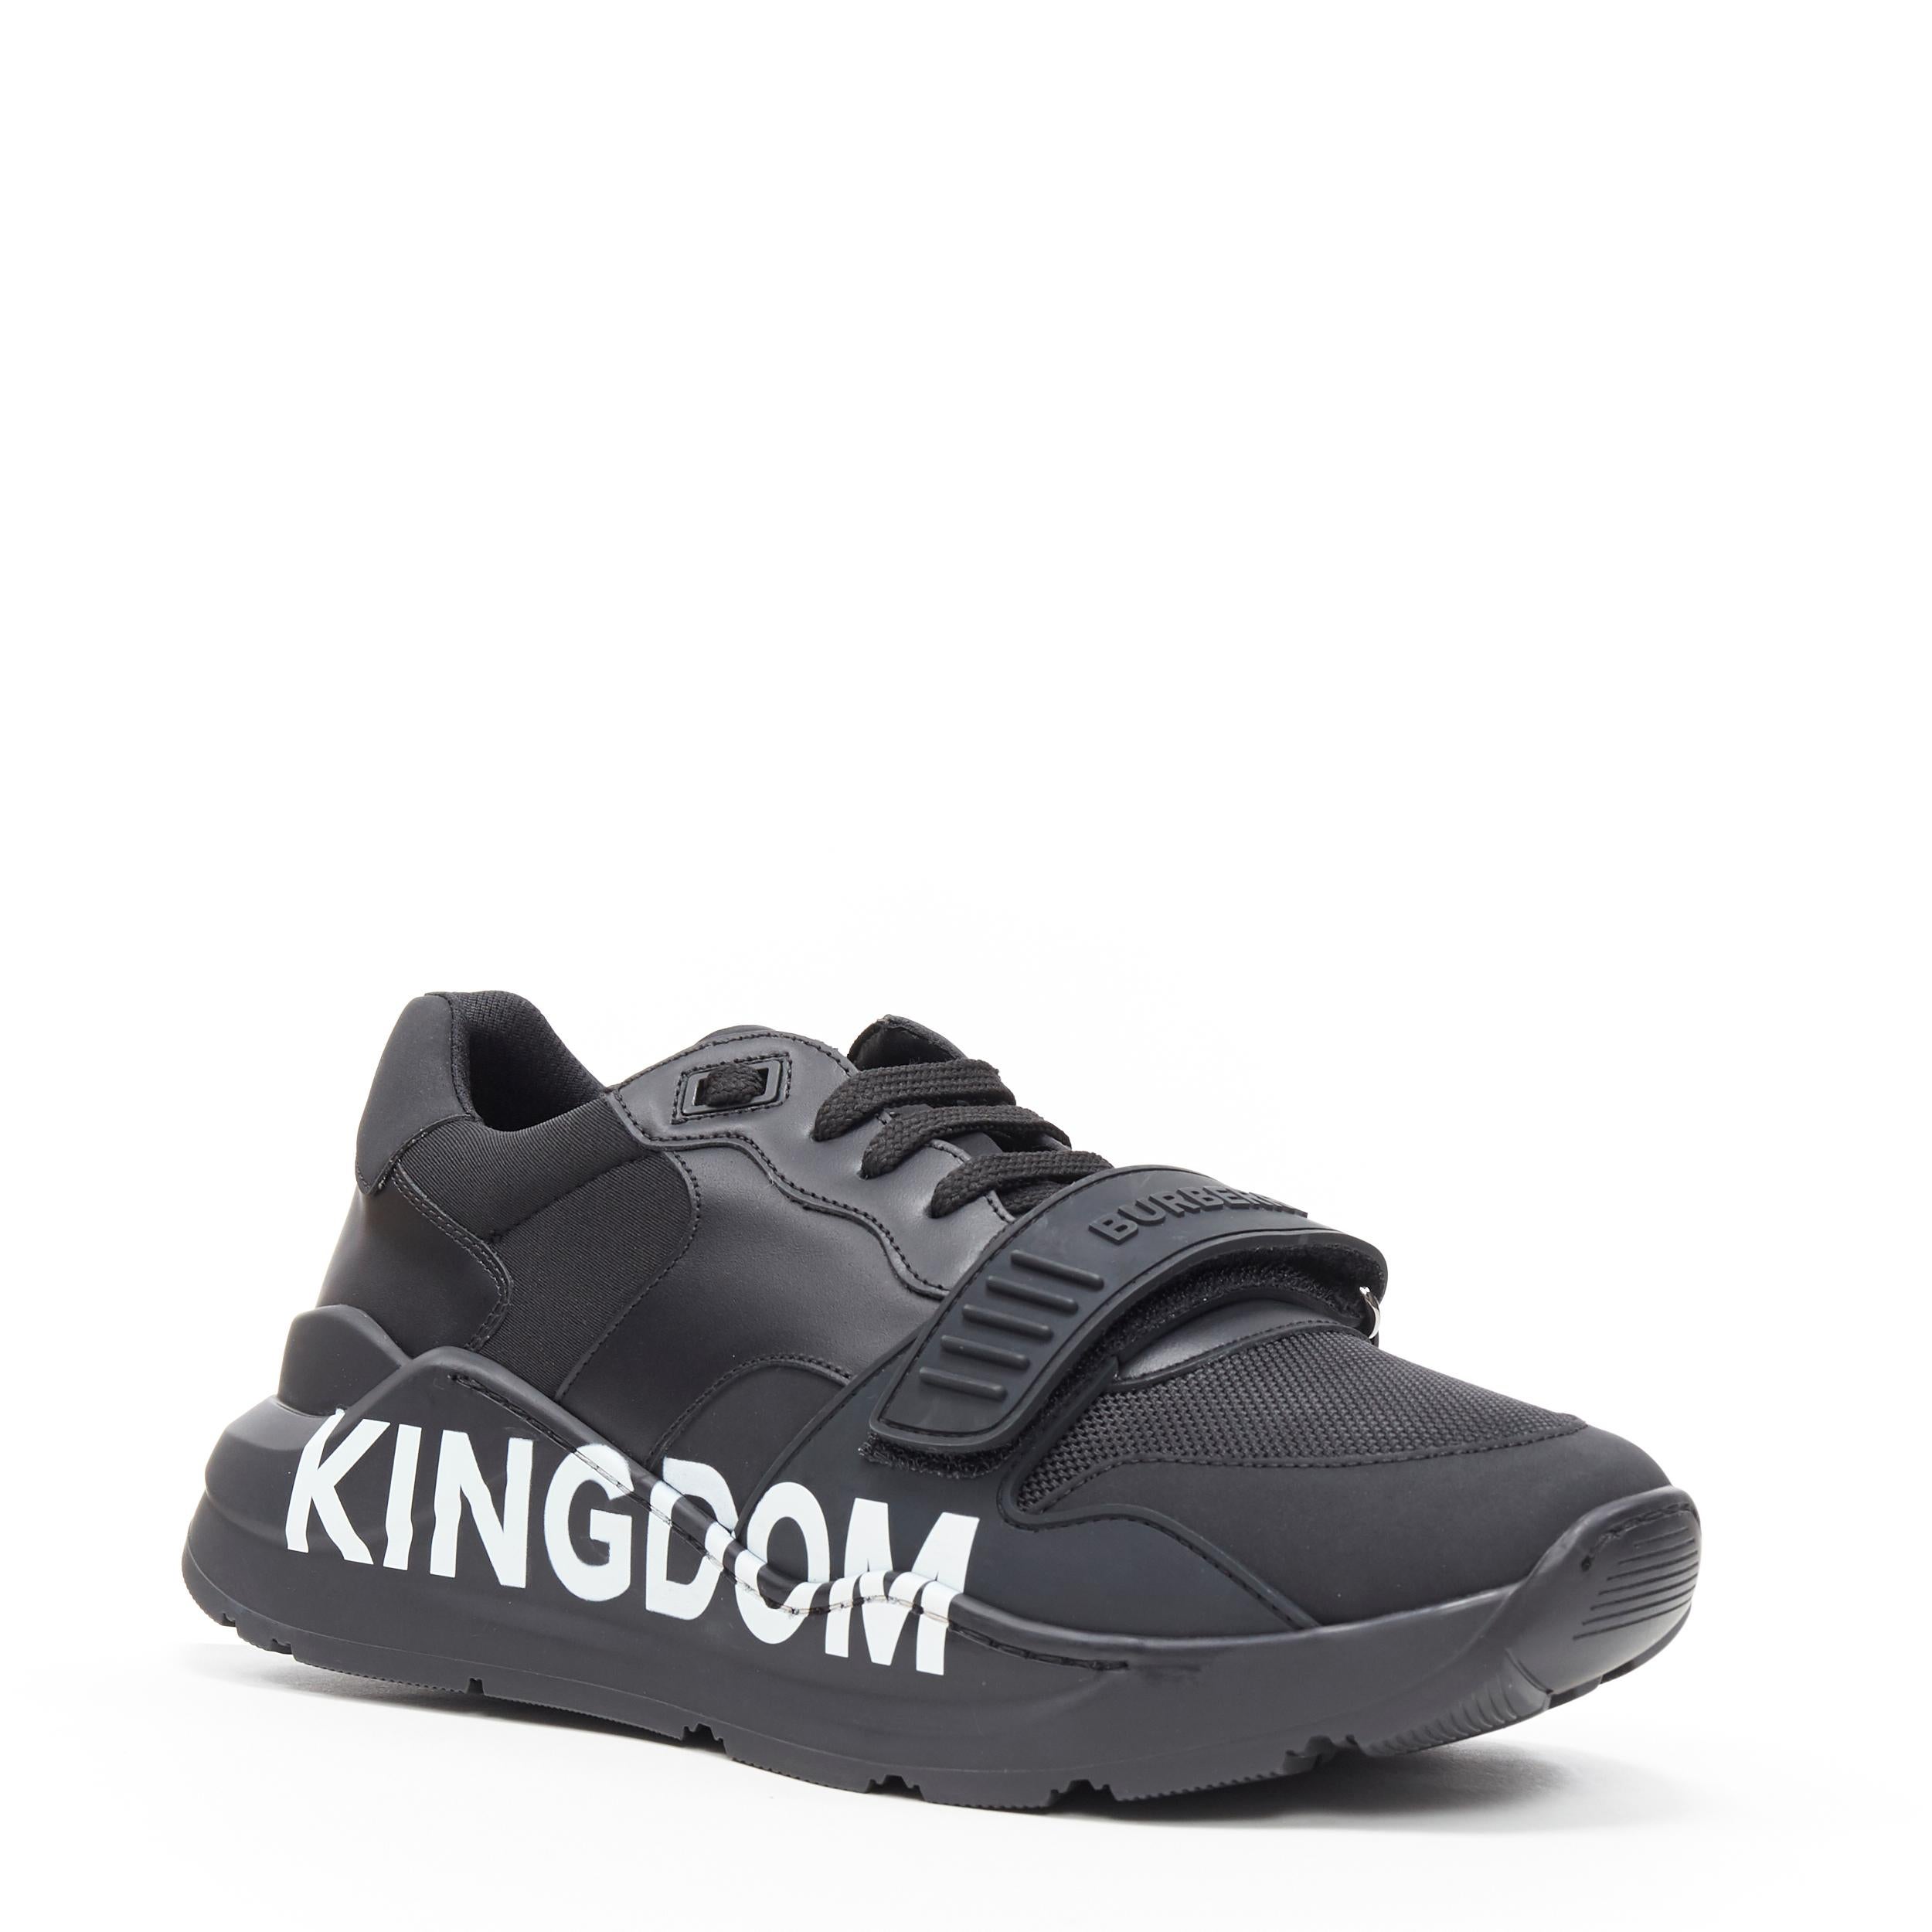 new BURBERRY TISCI Ramsey KINGDOM black leather low top chunky sneakers EU43
Brand: Burberry
Designer: Riccardo Tisci
Collection: 2019
Model Name / Style: Ramsey
Material: Leather
Color: Black
Pattern: Solid
Closure: Lace up
Lining material: